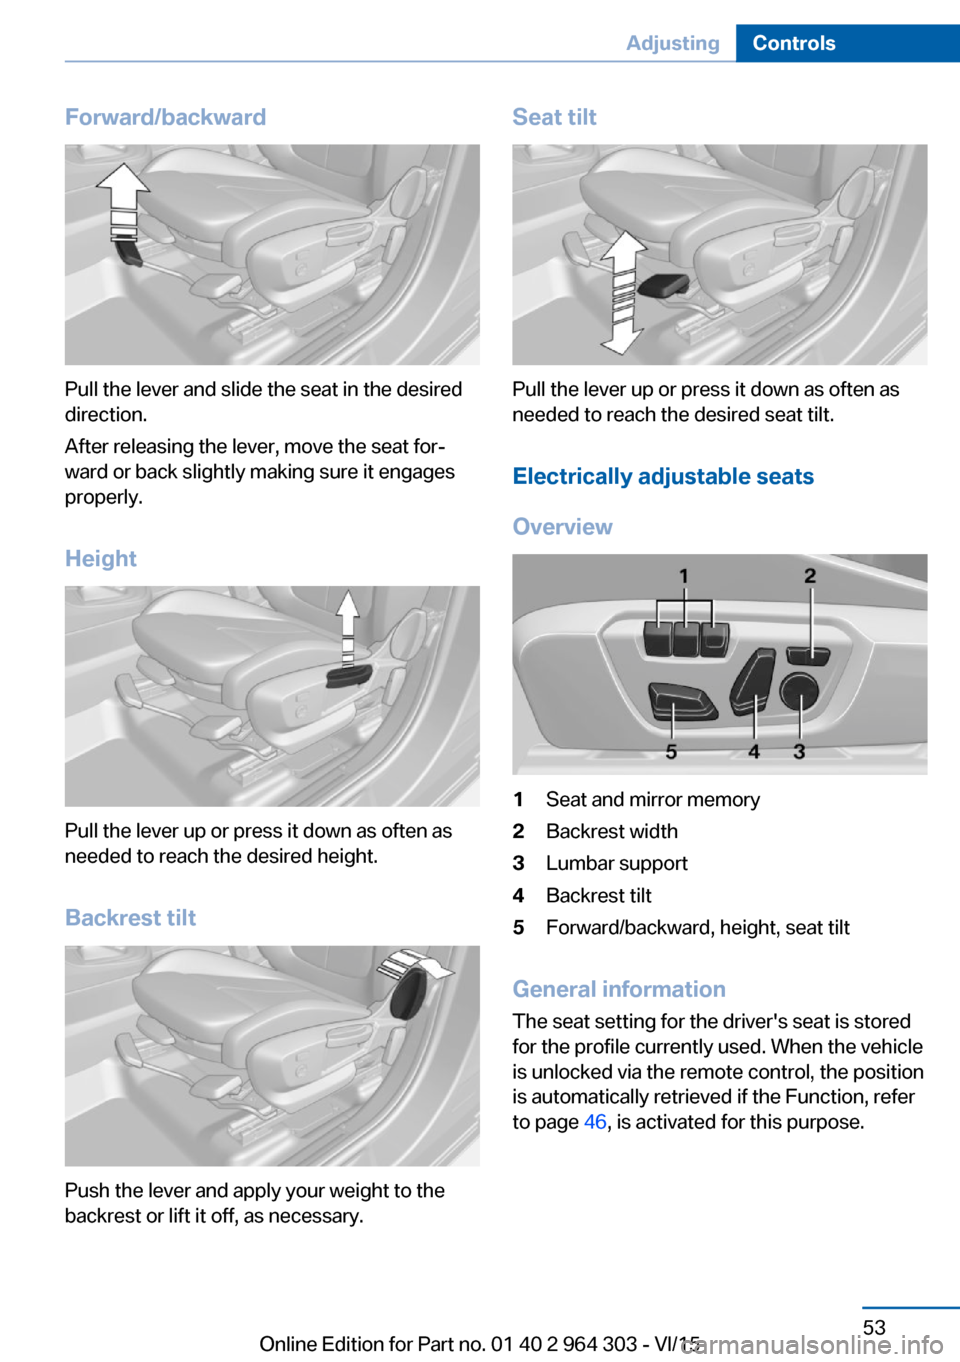 BMW X1 2016 F48 Owners Manual Forward/backward
Pull the lever and slide the seat in the desired
direction.
After releasing the lever, move the seat for‐
ward or back slightly making sure it engages
properly.
Height
Pull the leve